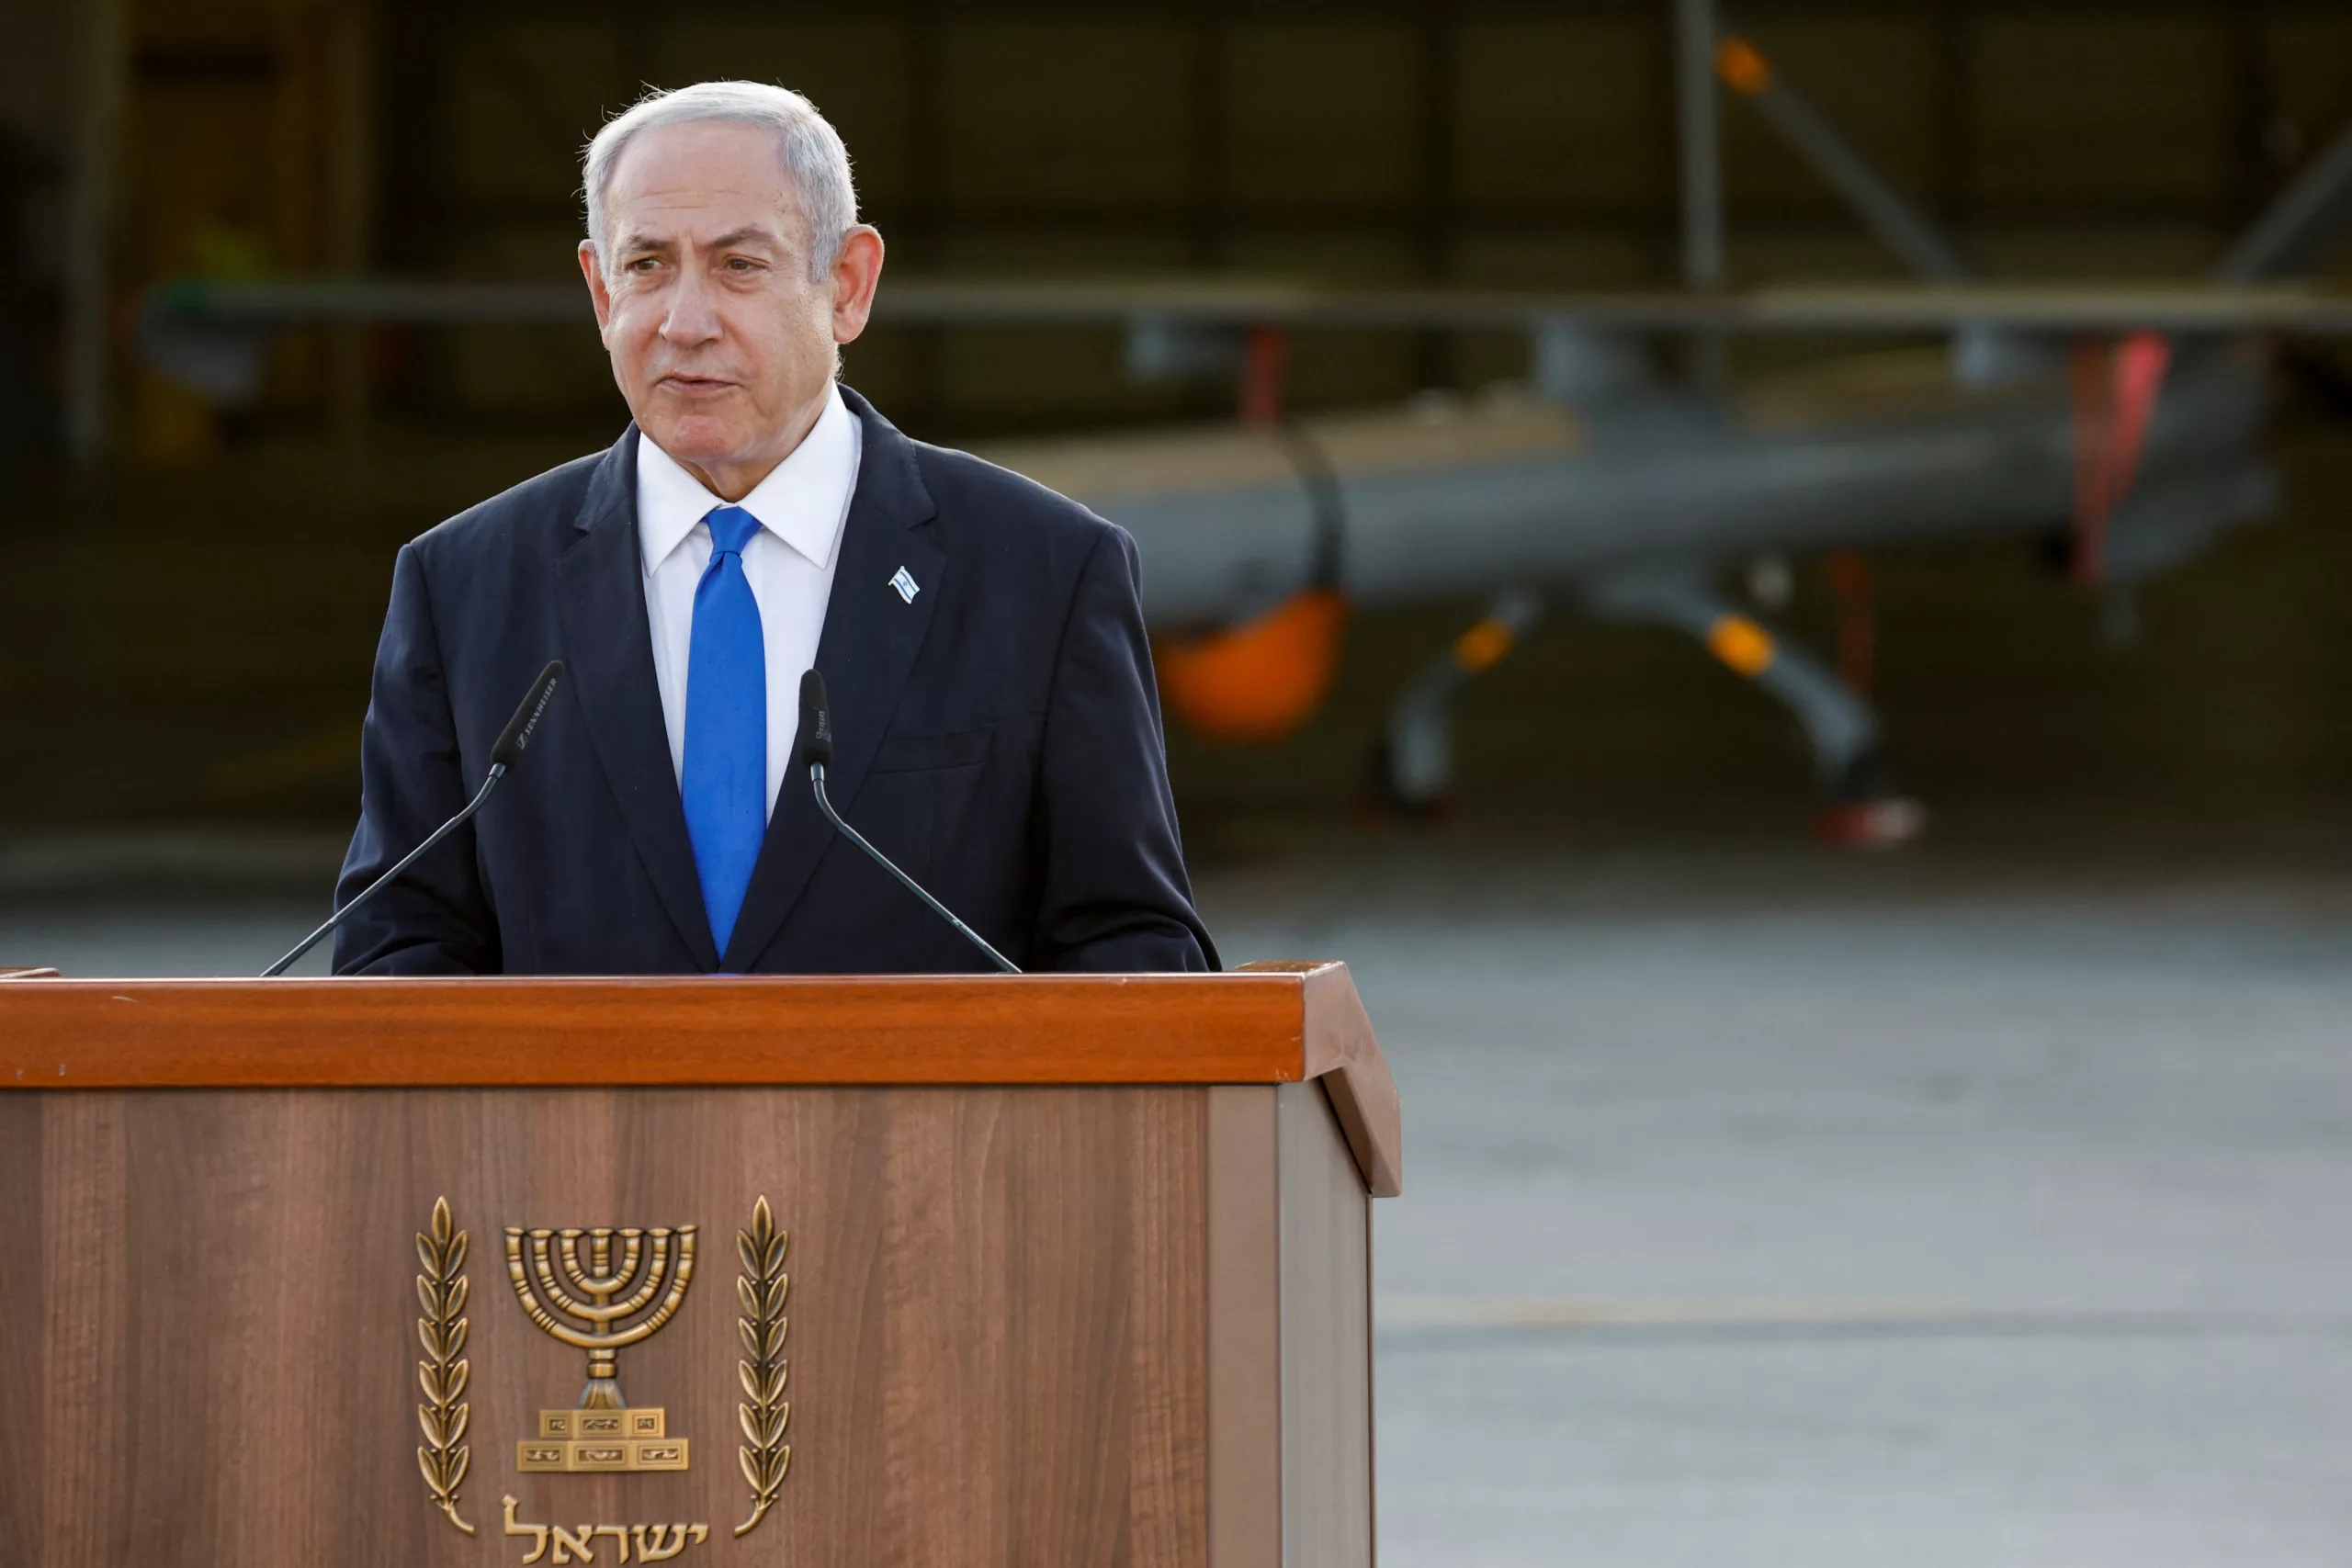 “We Have to go in, We Can’t Negotiate Now,” Netanyahu